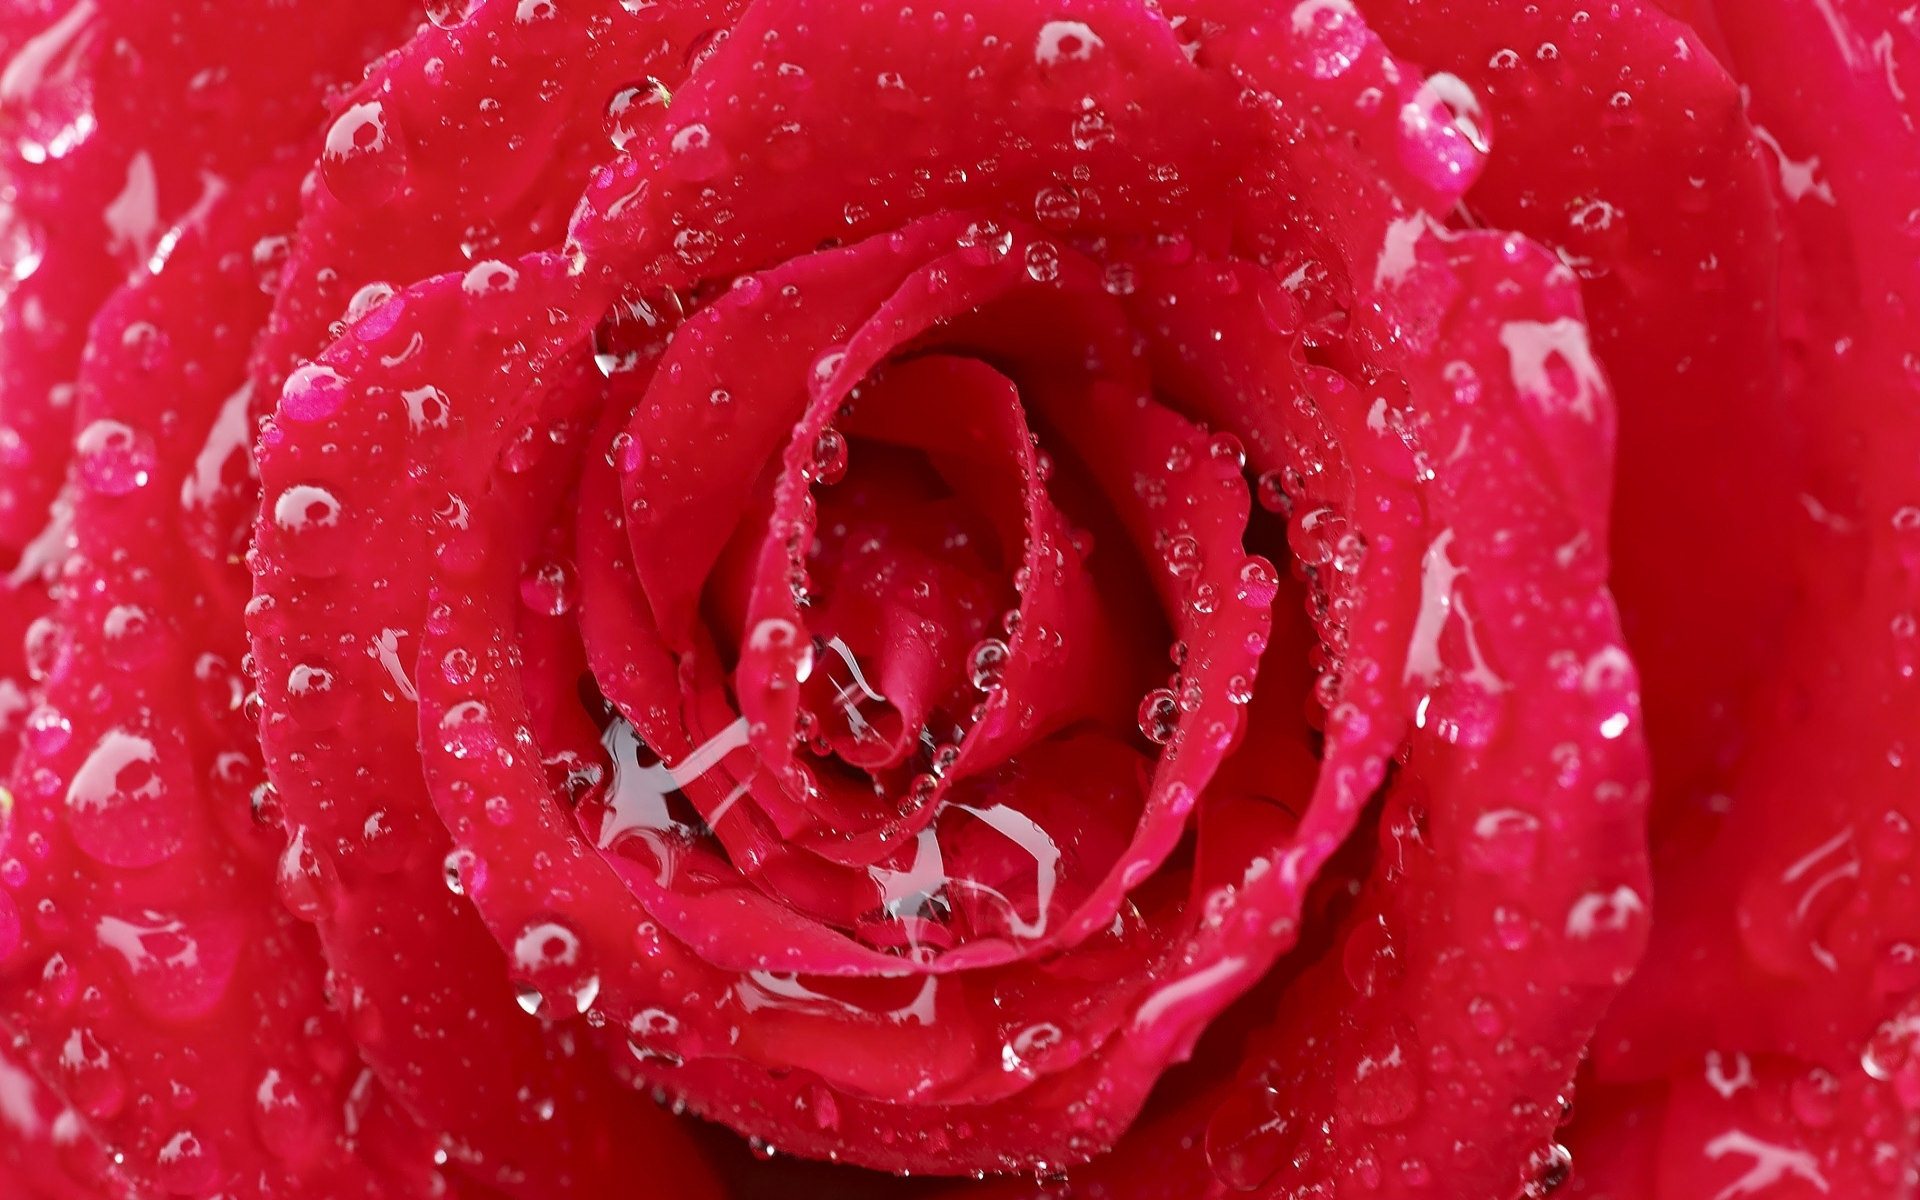 Red Rose Widescreen Hd Wallpaper - Rose Flowers Red Colour - HD Wallpaper 